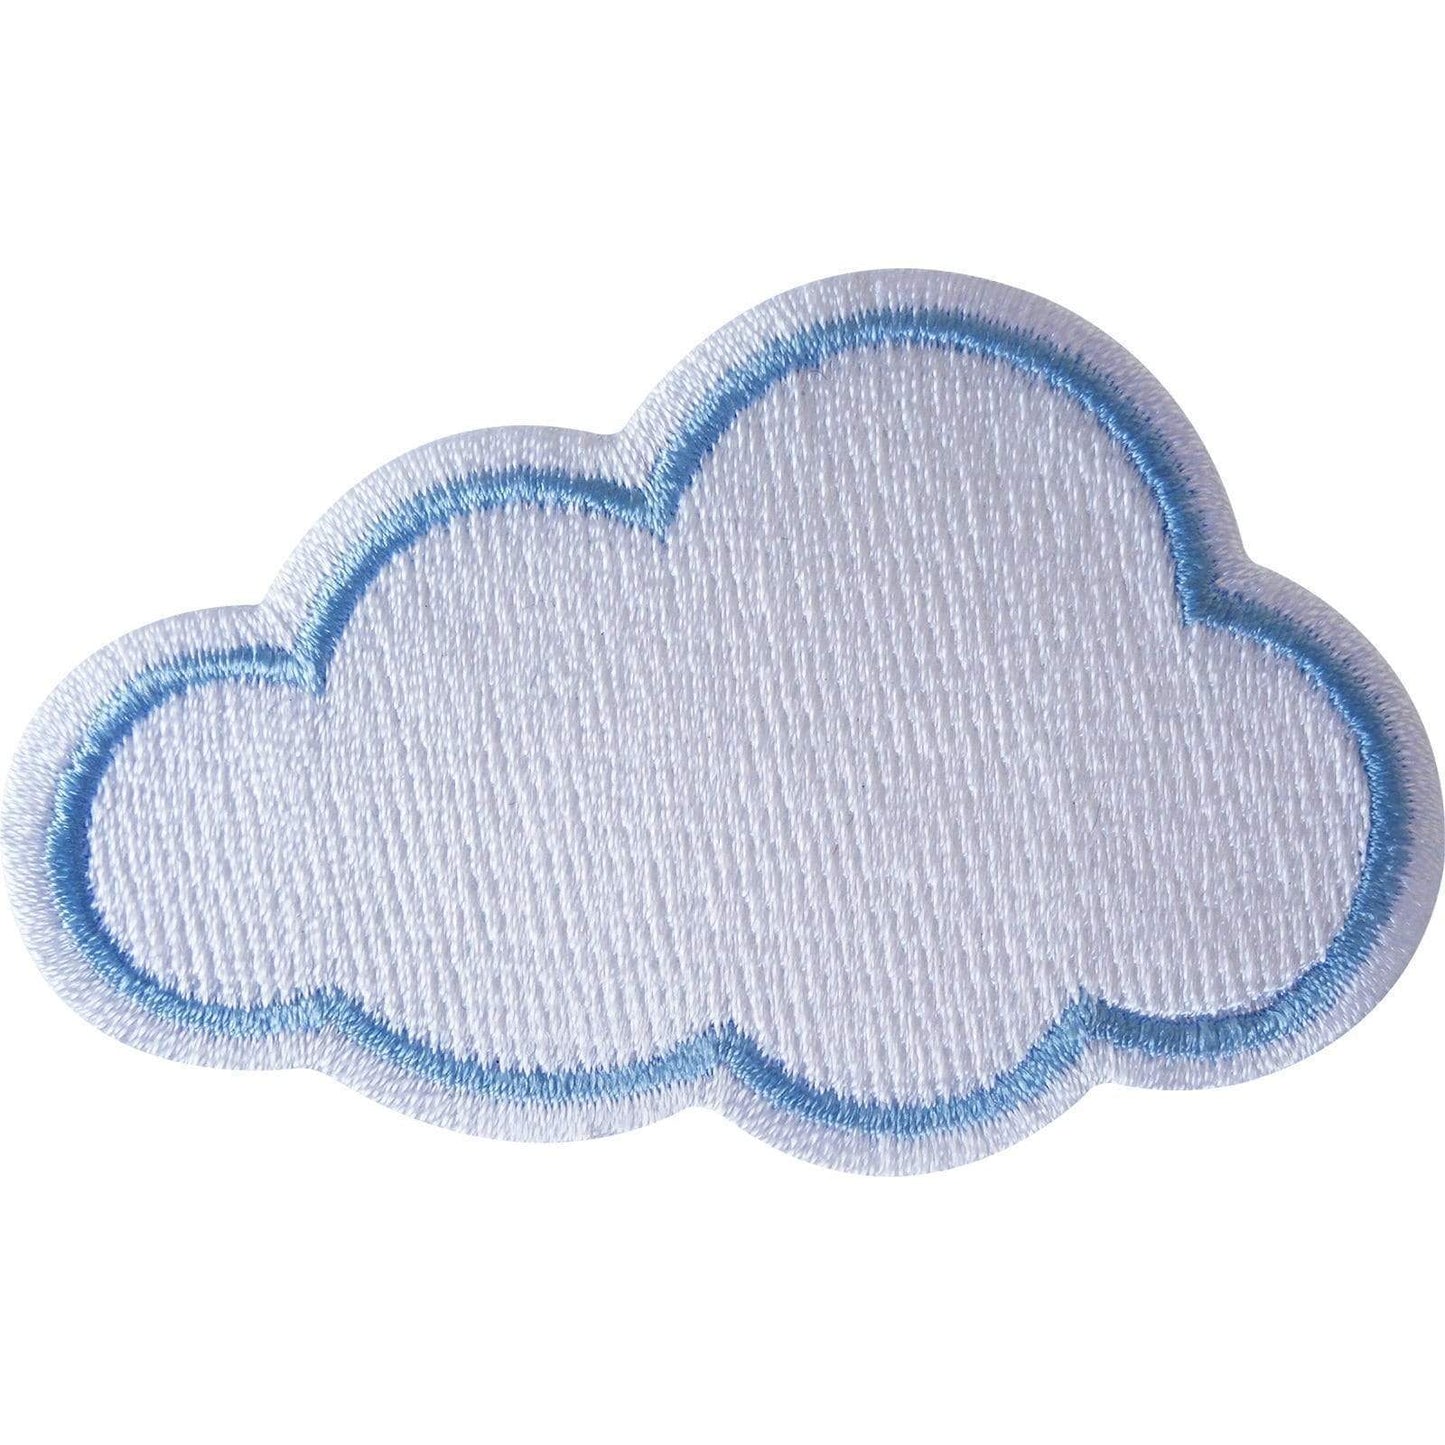 Embroidered Iron On Cloud Patch / Sew On Badge for Cloth Jacket Jeans Bag Crafts